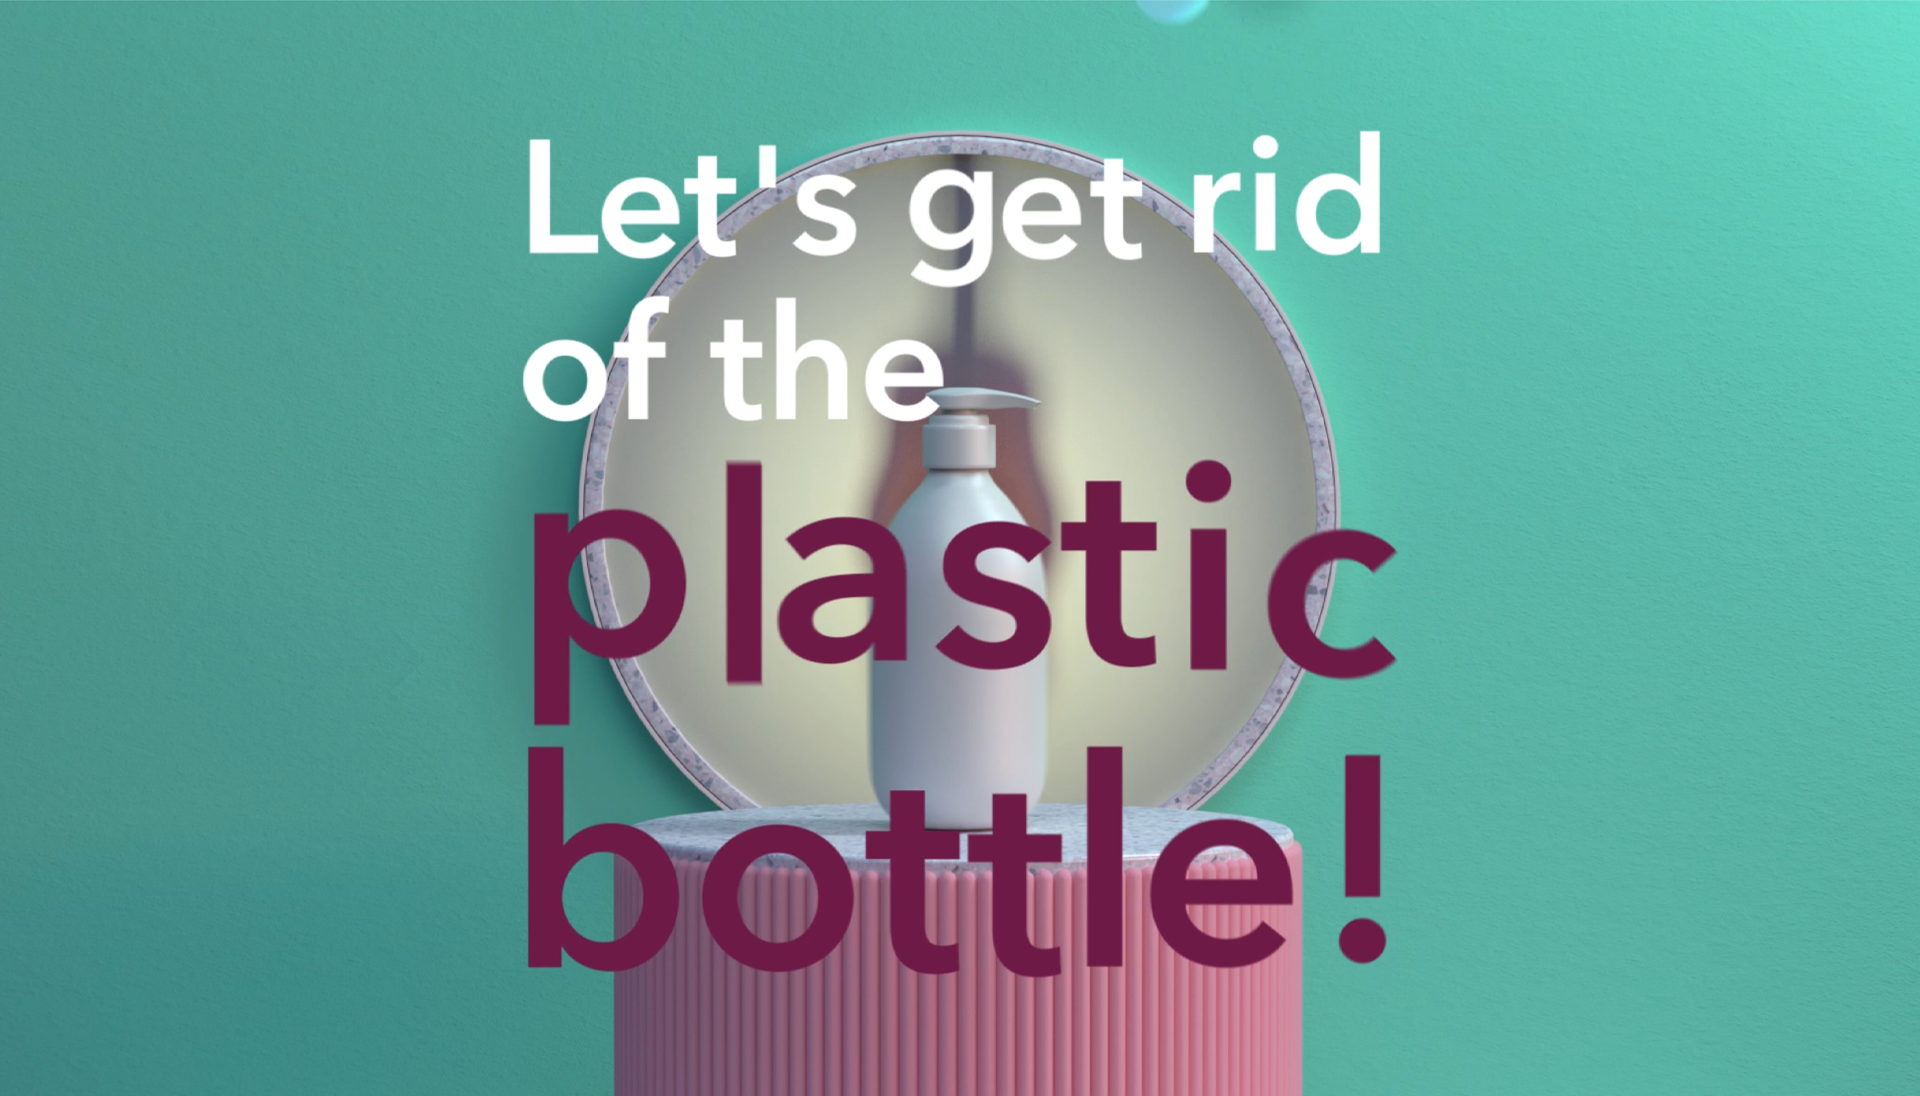 Let's get rid of the plastic bottle